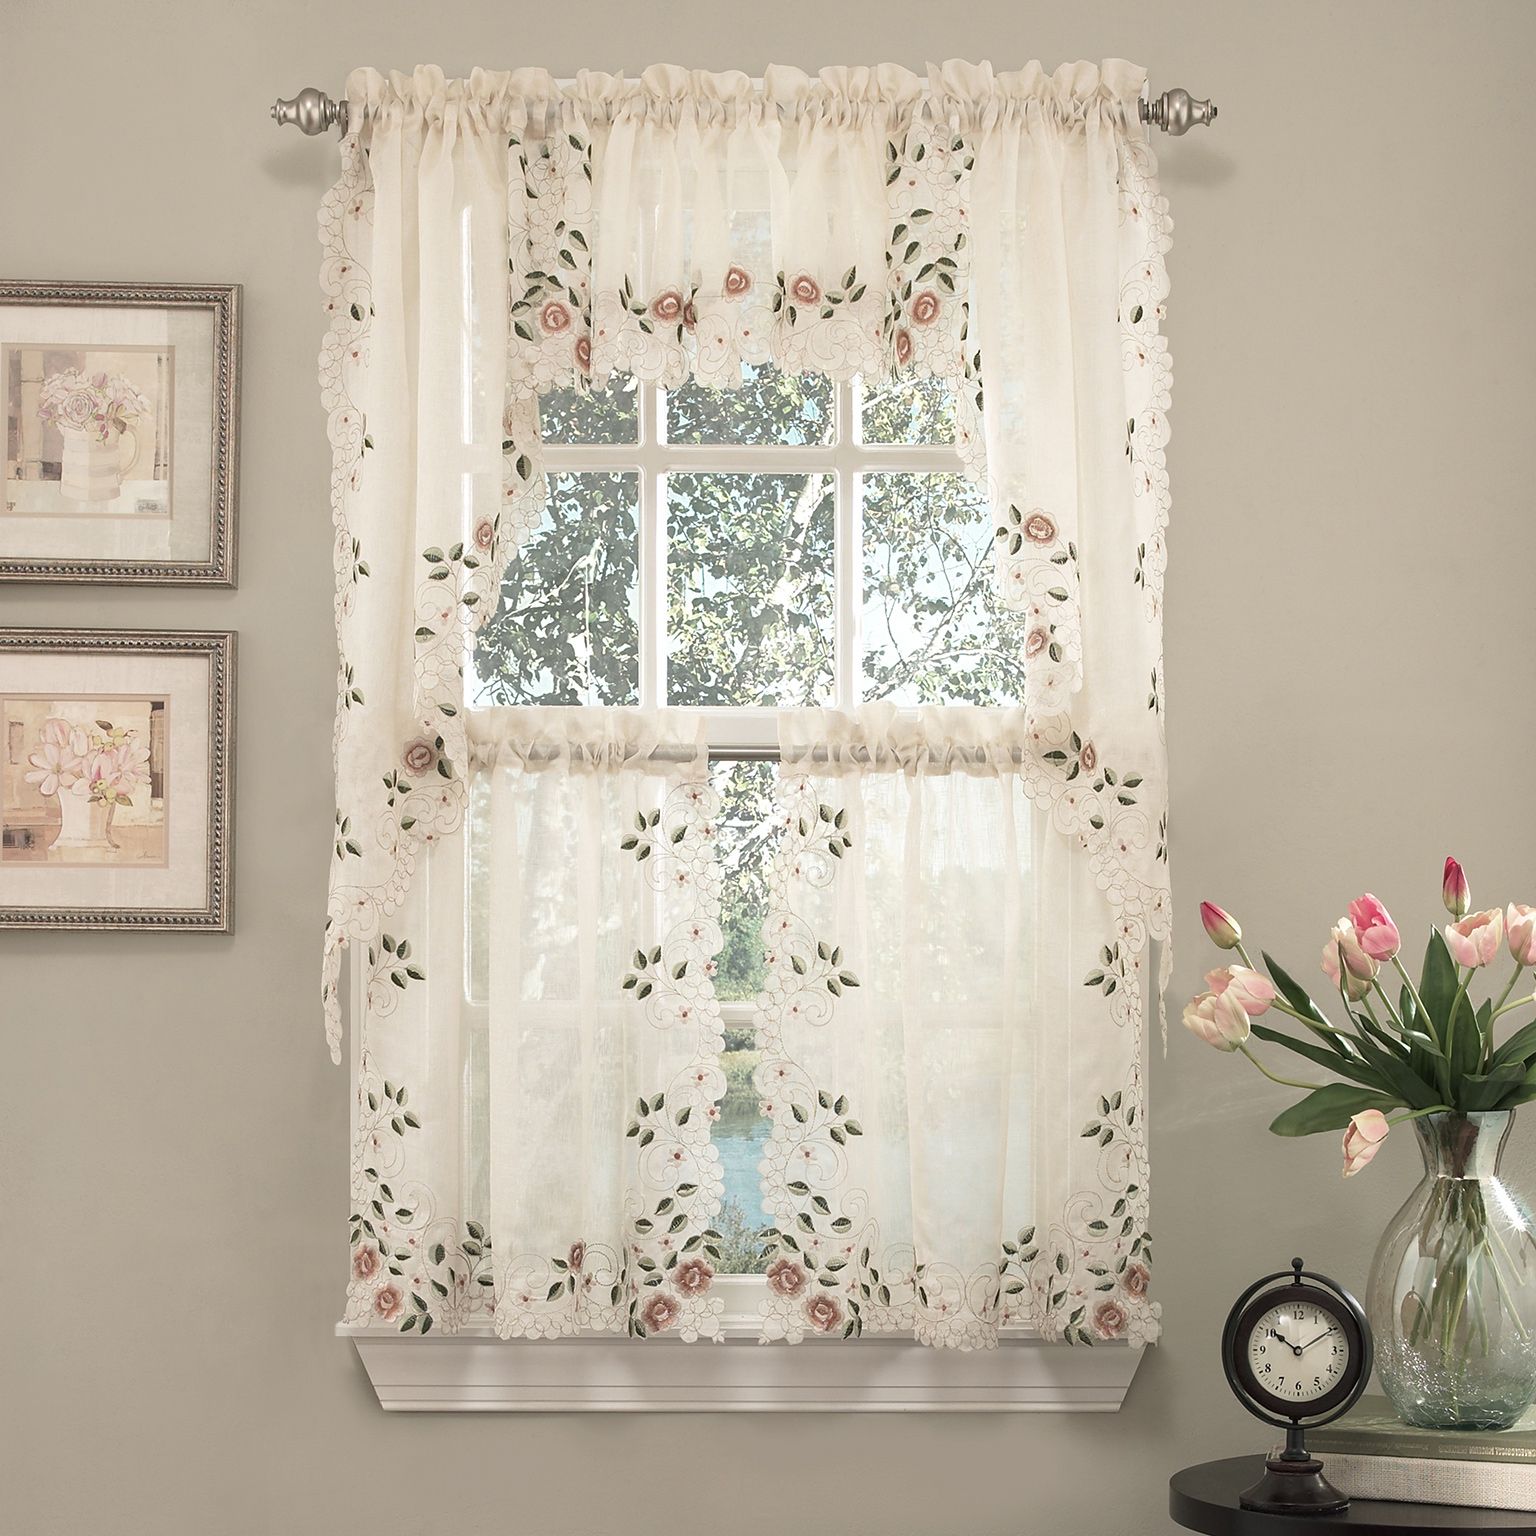 Details About Rosemary Floral Embroidered Semi Sheer Kitchen Curtain 36"  Tier Swag Valance Set Regarding Floral Embroidered Sheer Kitchen Curtain Tiers, Swags And Valances (Photo 1 of 20)